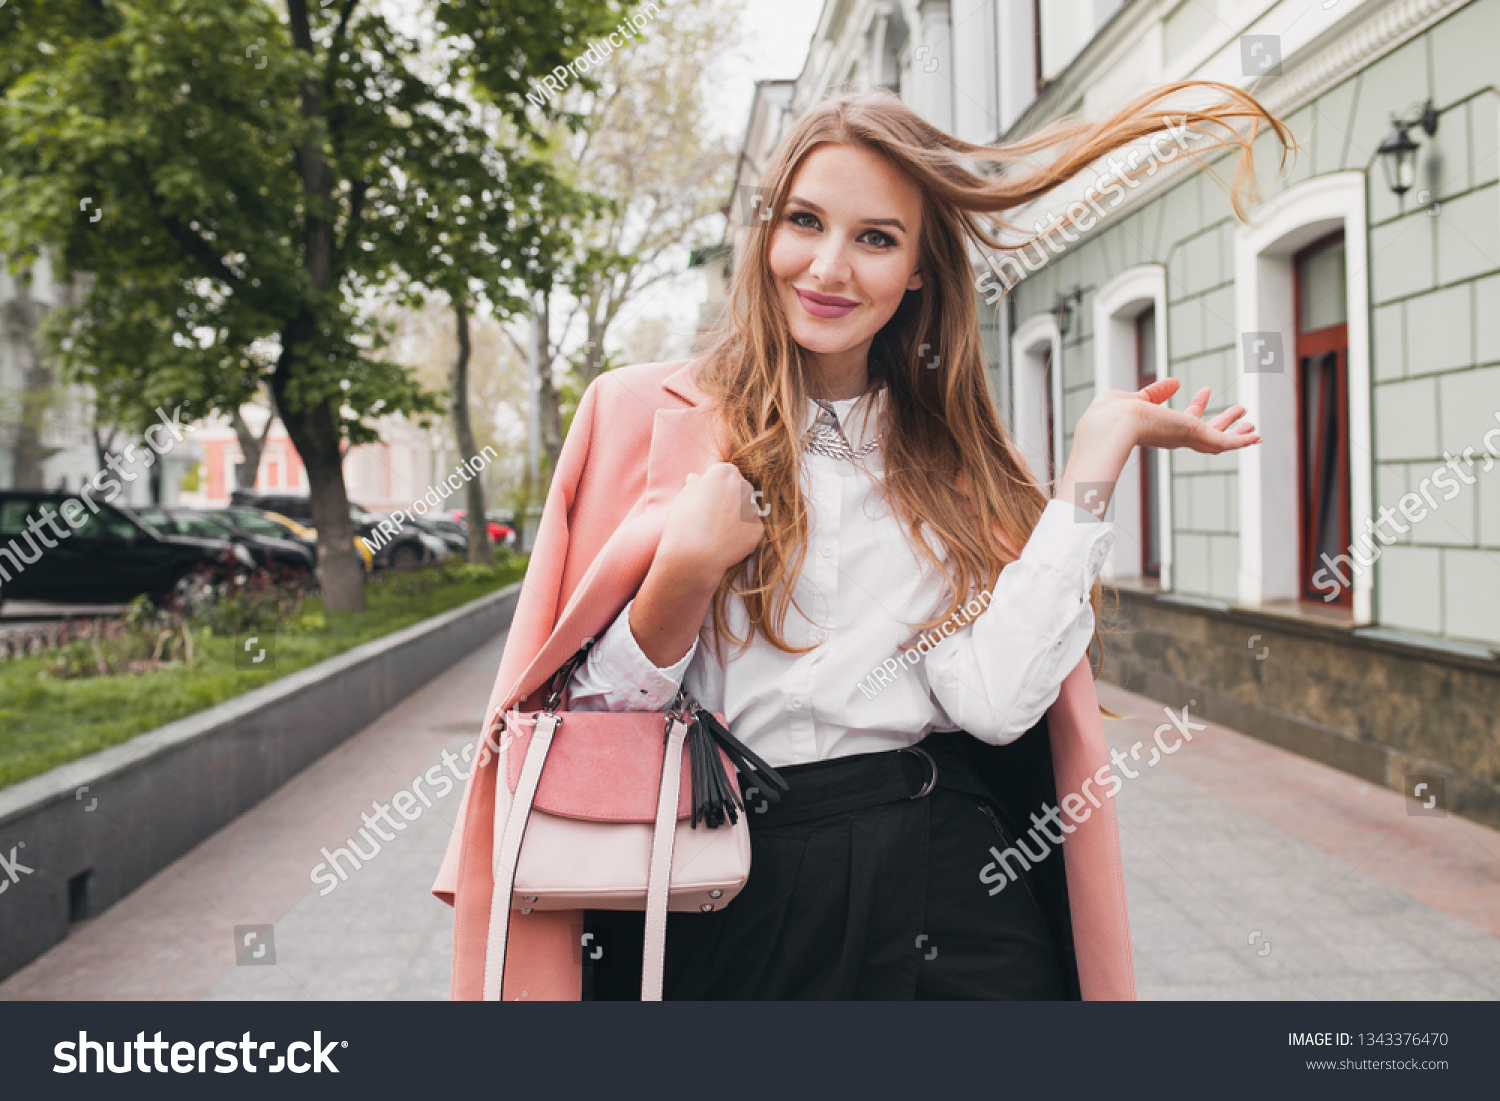 attractive stylish smiling woman walking city street in pink coat spring fashion trend holding purse, elegant style, waving long hair #1343376470